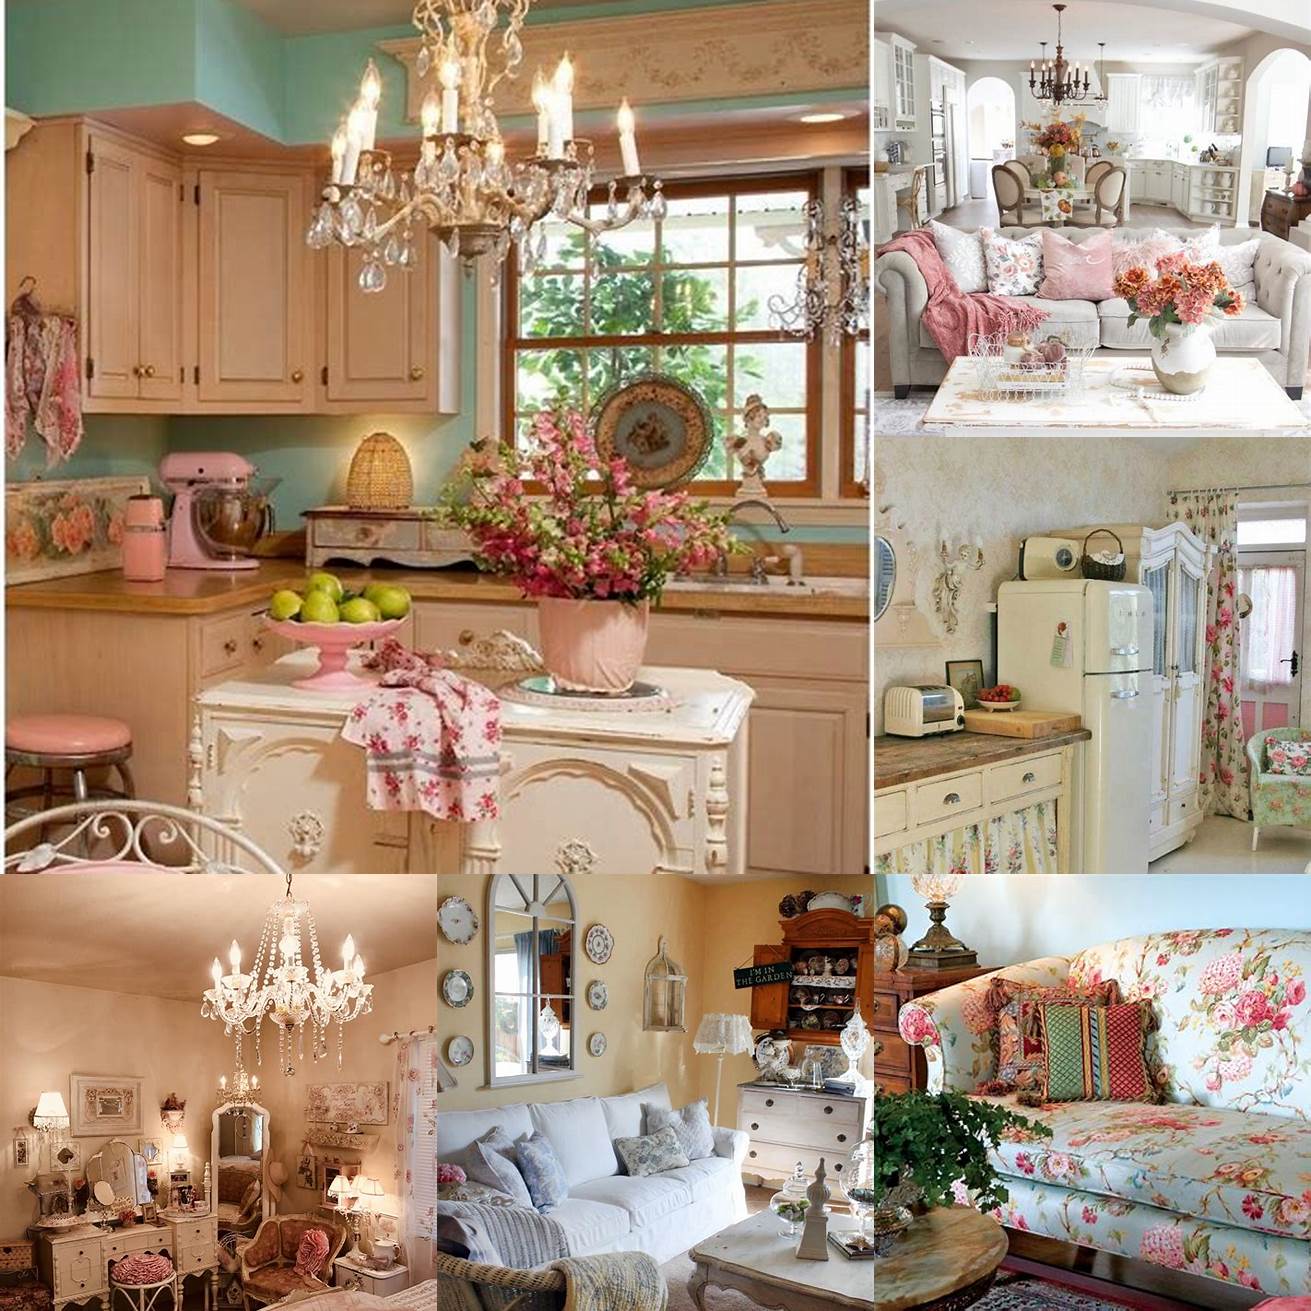 Use soft pastel colors and floral patterns to create a vintage shabby-chic look